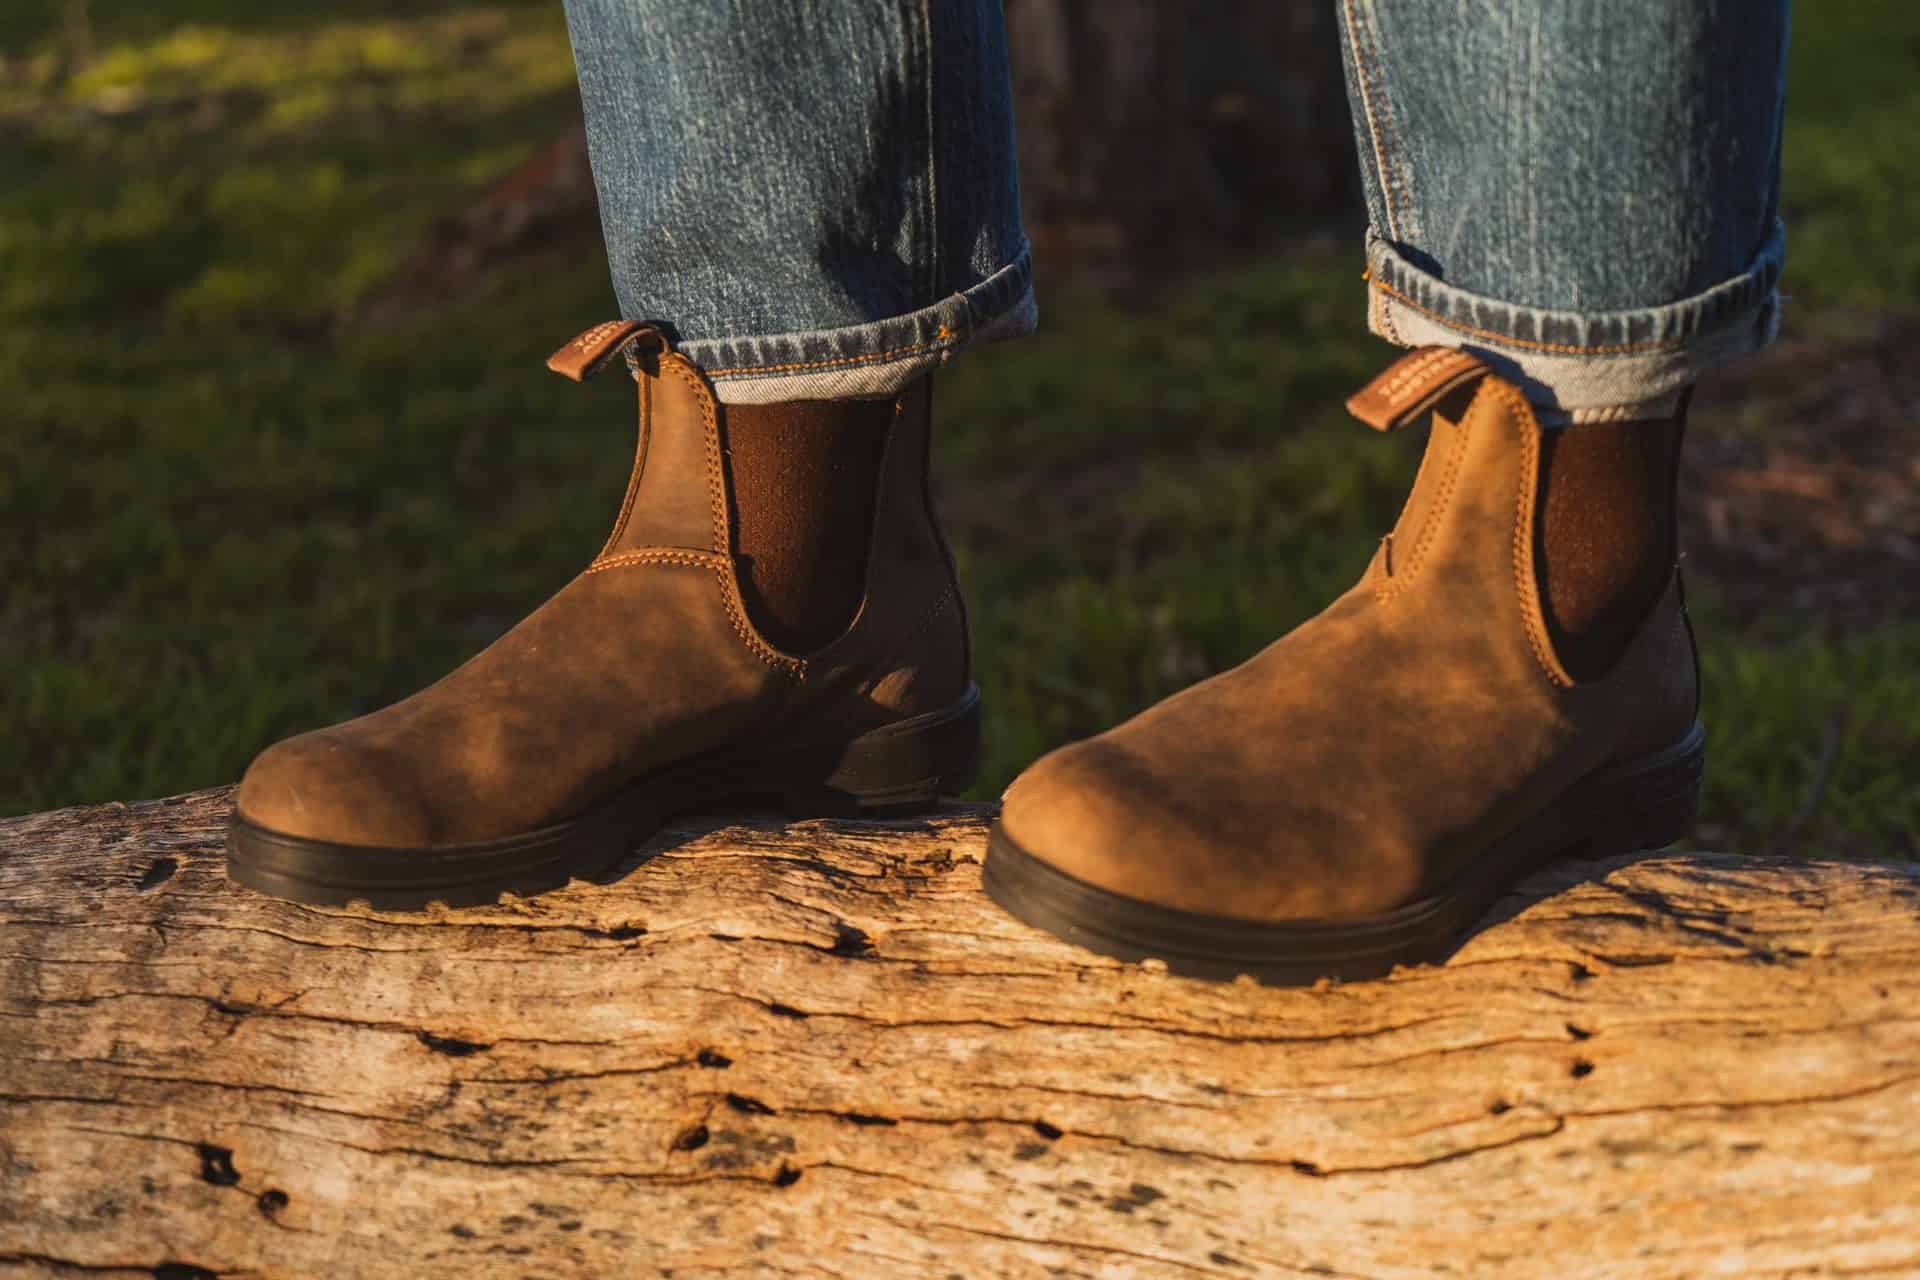 Are Blundstones Worth The Cost